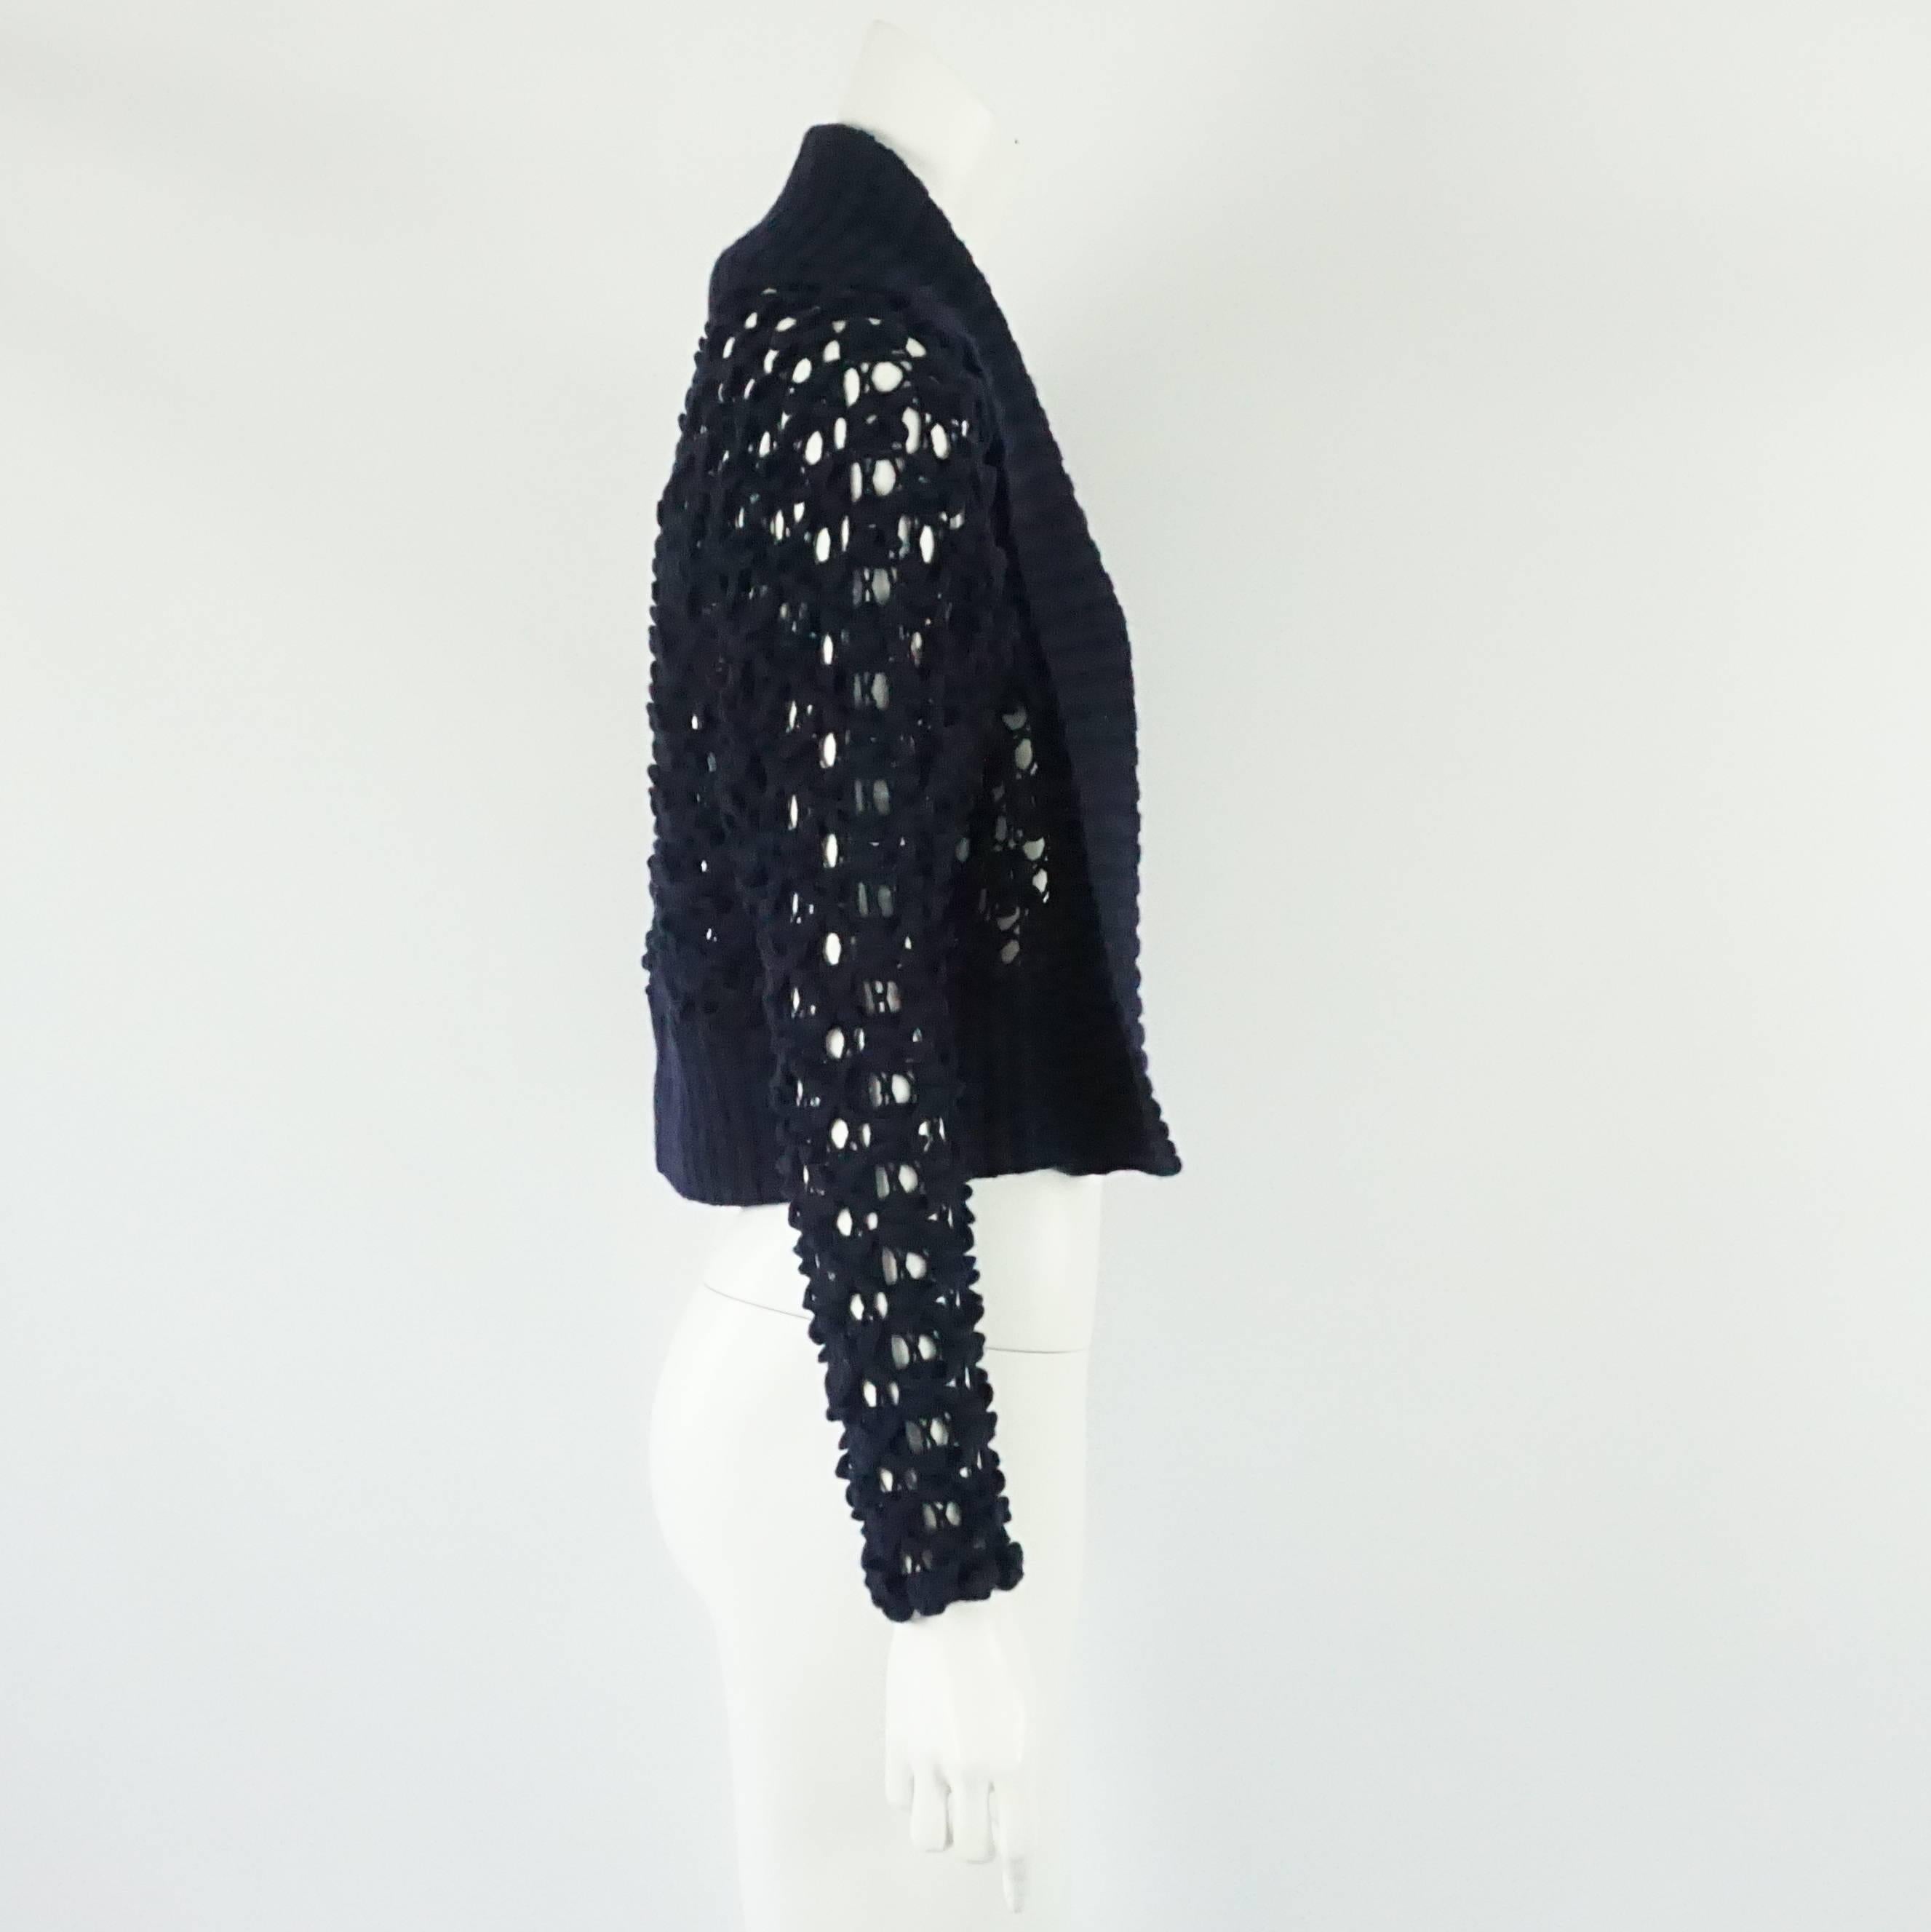 Oscar de la Renta Navy Crochet Cashmere Cardigan - XS  This crochet style cashmere sweater/cardigan has a ribbed collar and border along the bottom of the sweater. This piece is in excellent condition.
Measurements:
Collar width: 6